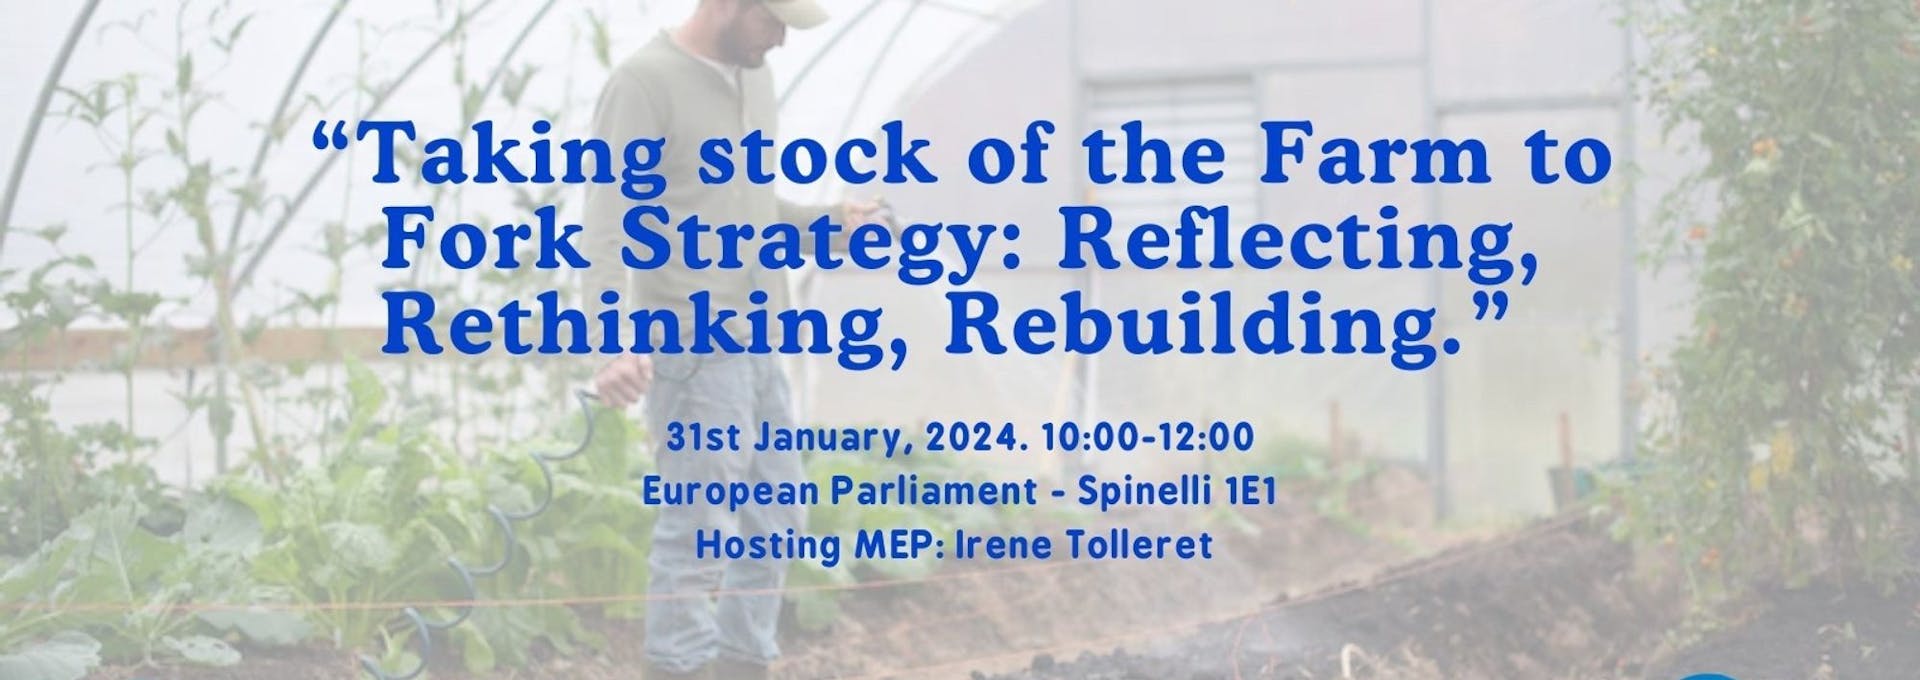 EFF - EJD: “Taking stock of the Farm to Fork Strategy: Refle...